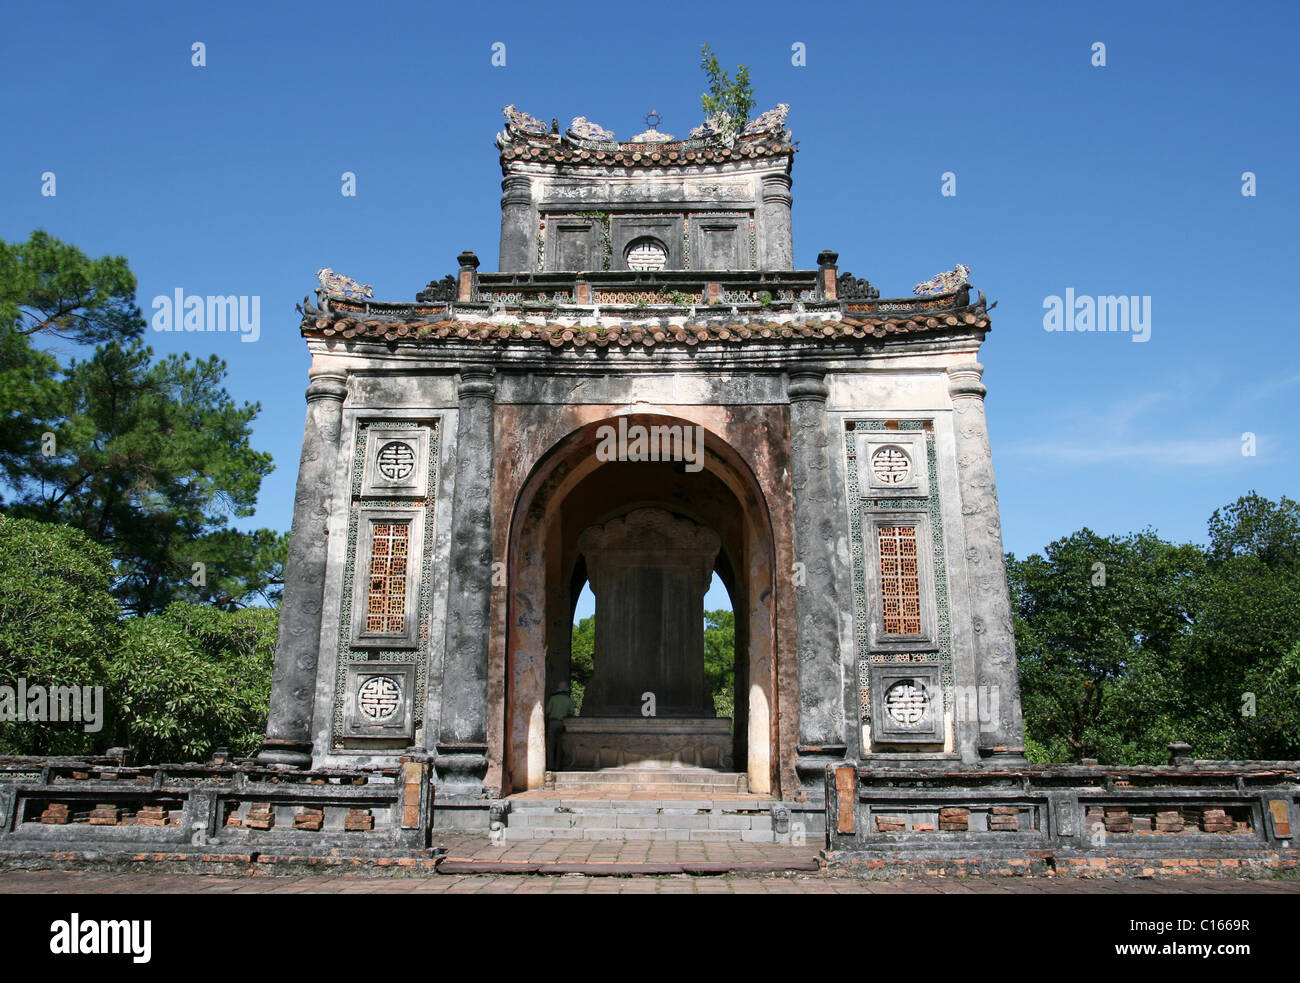 Temple structure near the emperor's tombs near Hue, Vietnam Stock Photo